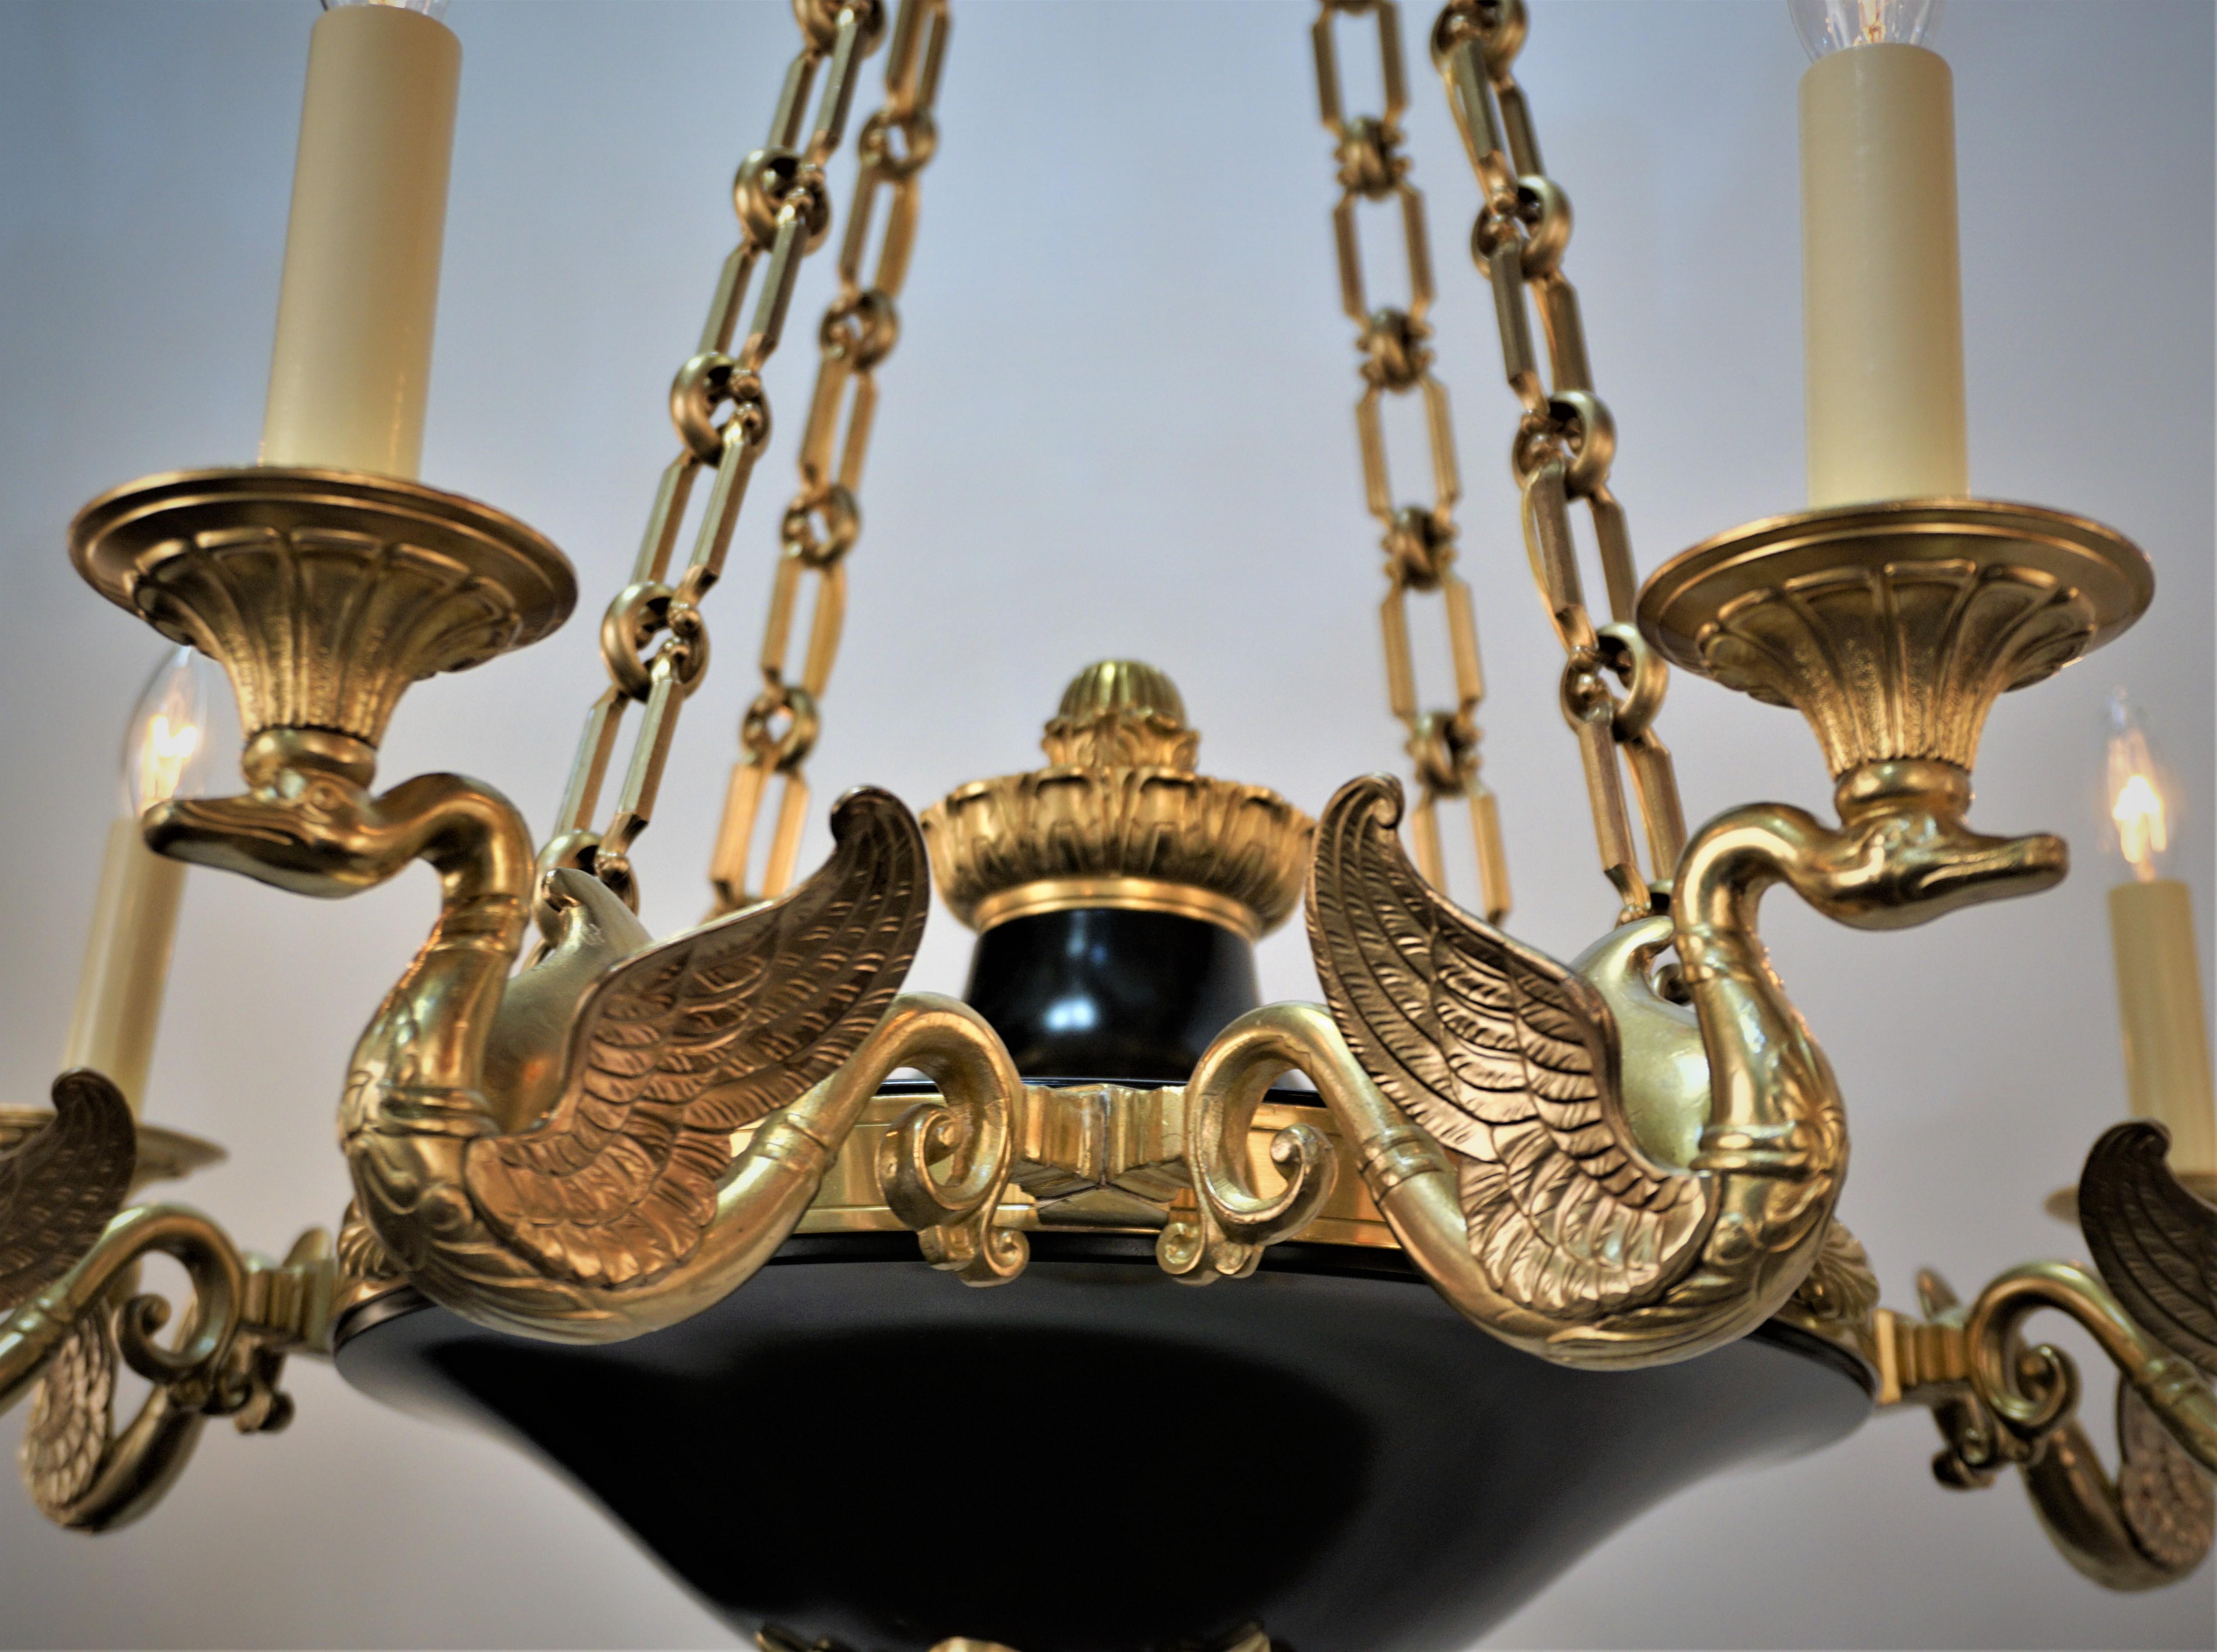 French Empire bronze and black enameled eight light open wing swan arms chandelier.
Professionally rewired and ready for installation.